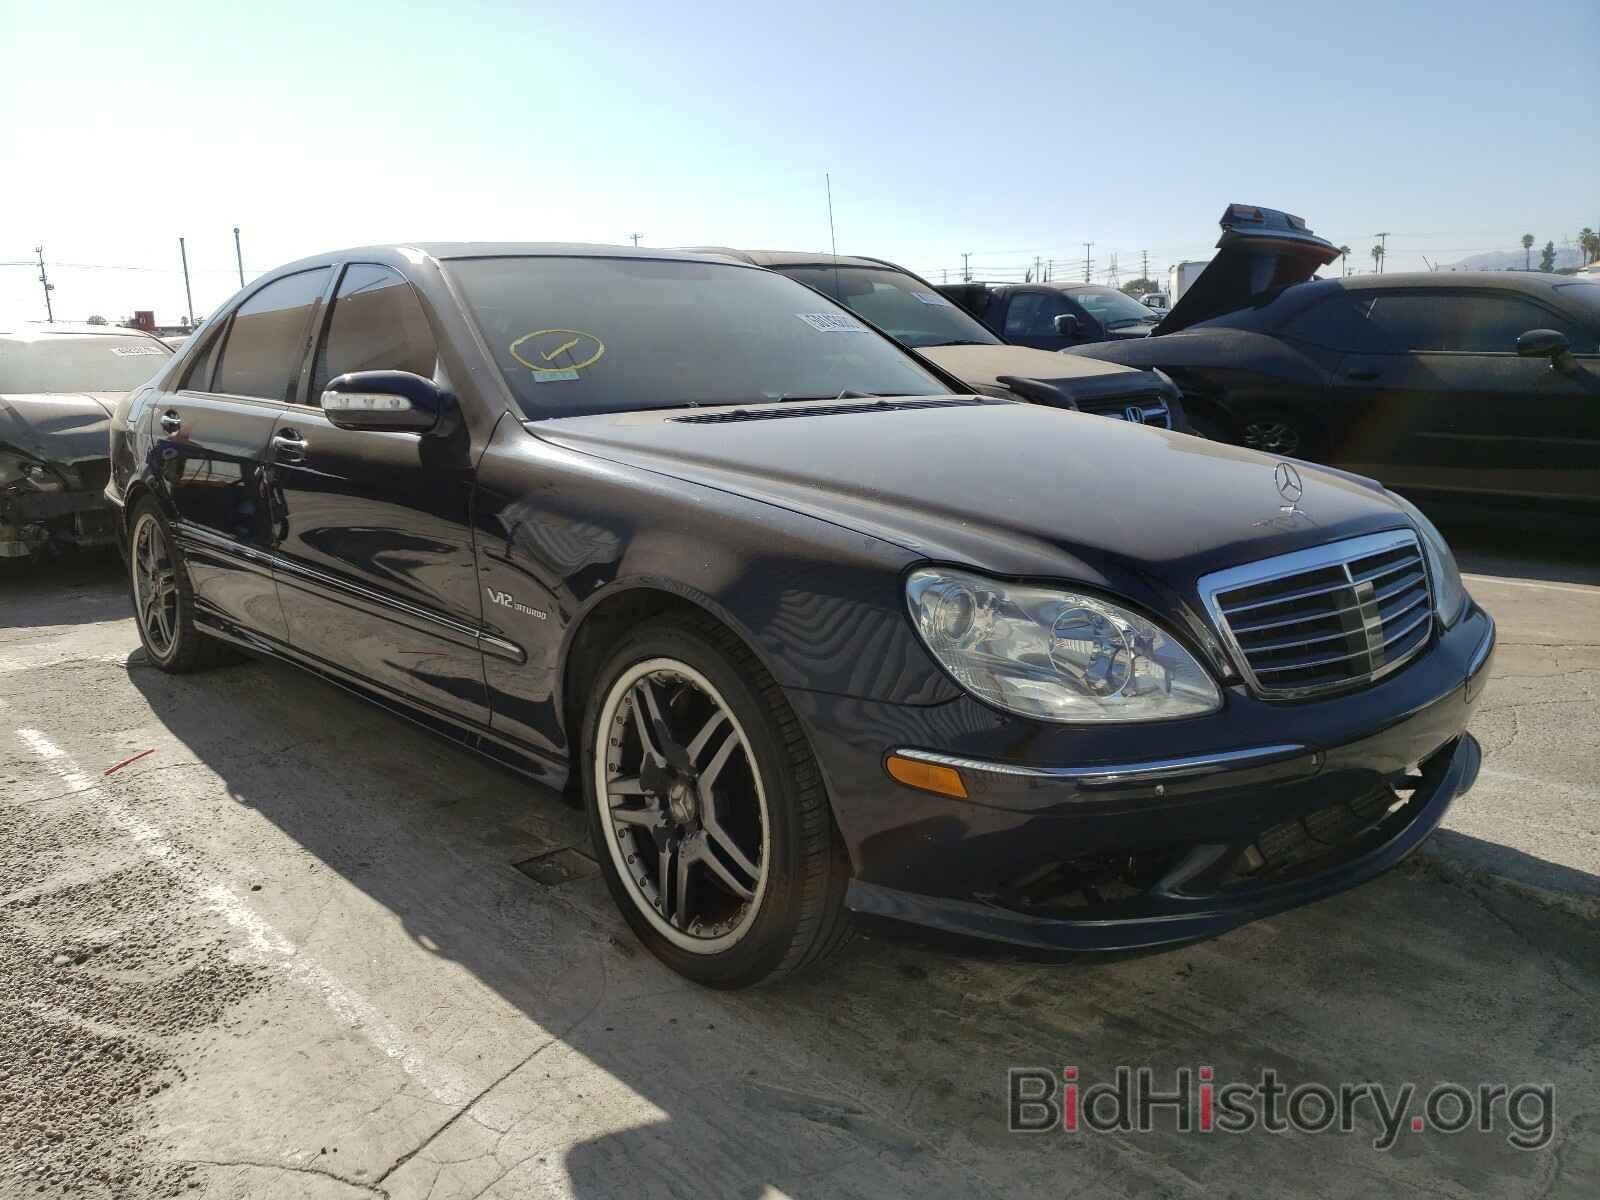 Photo WDBNG79JX6A468633 - MERCEDES-BENZ AMG 2006